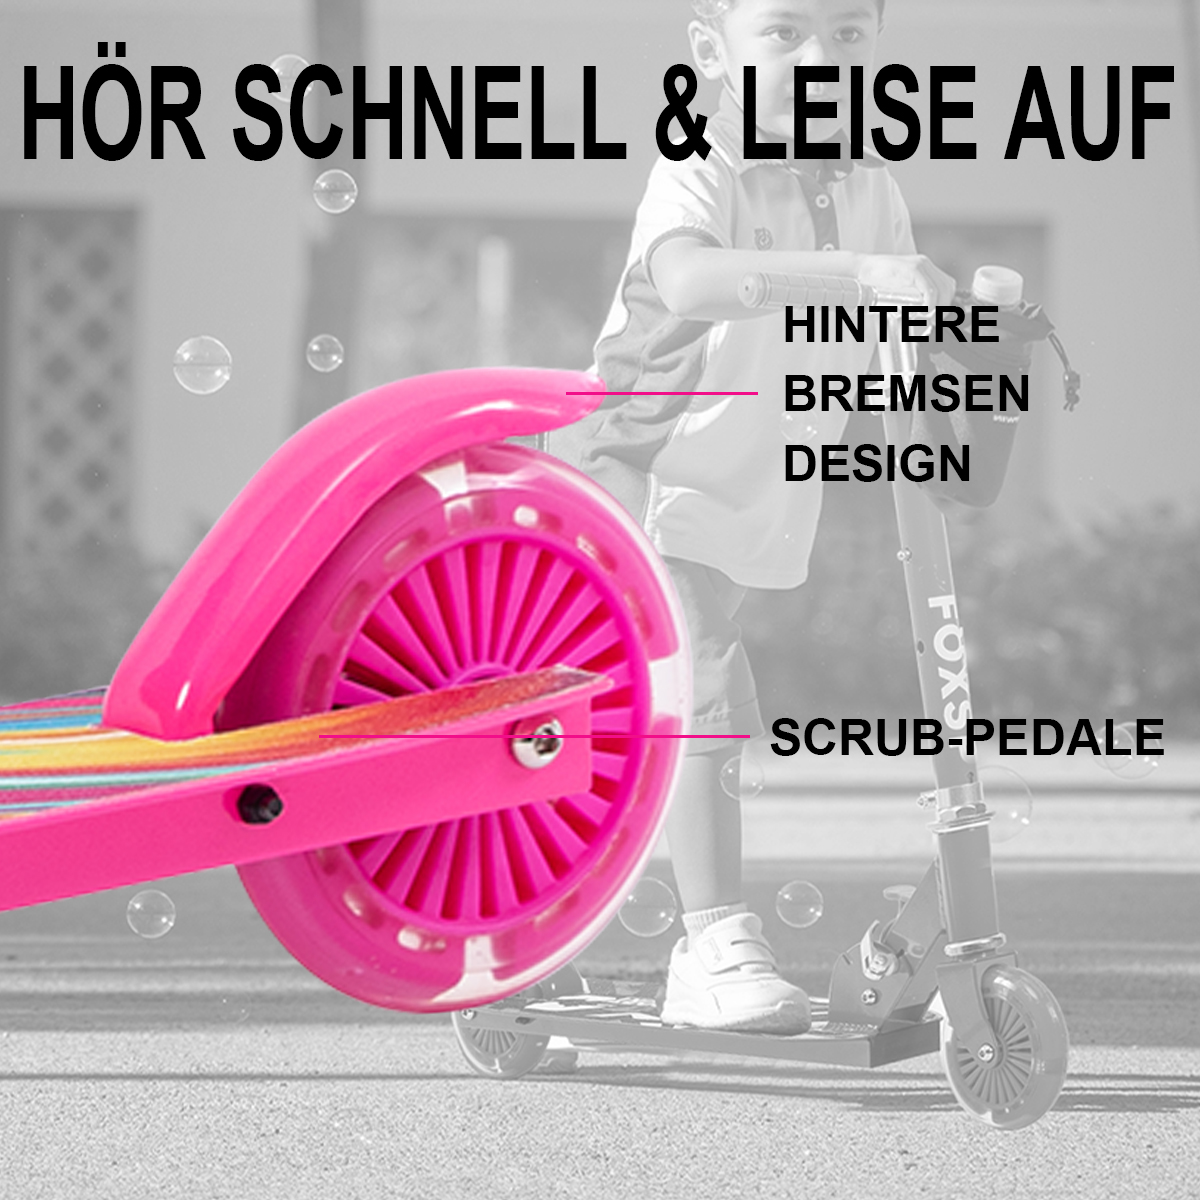 FOXSPORT Scooter Kinder Rosarot) A Rot Rosa (4,7 Zoll